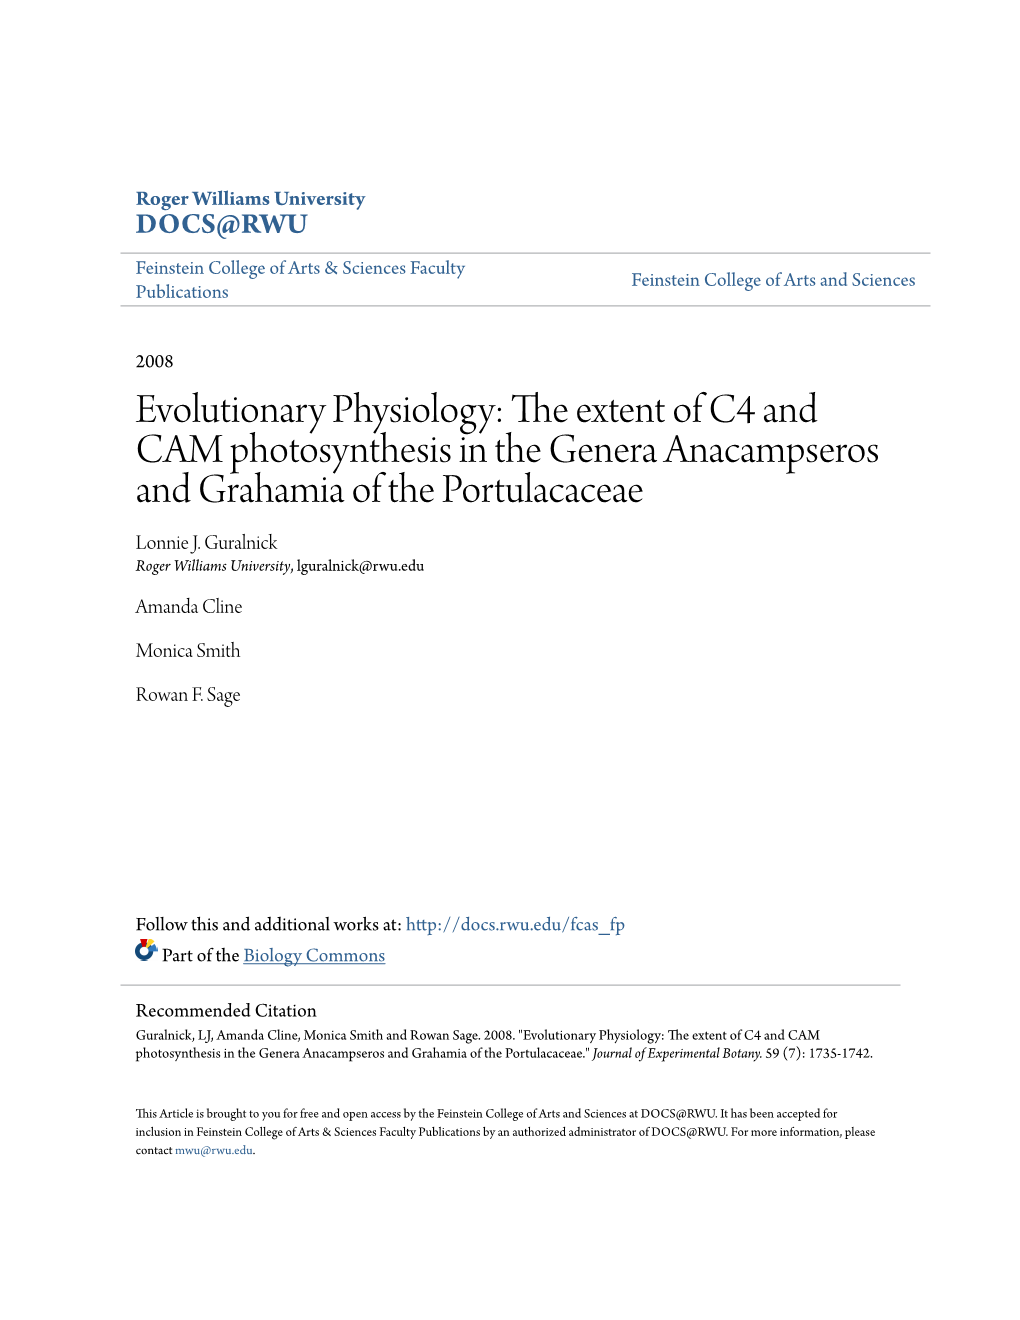 Evolutionary Physiology: the Extent of C4 and CAM Photosynthesis in the Genera Anacampseros and Grahamia of the Portulacaceae Lonnie J